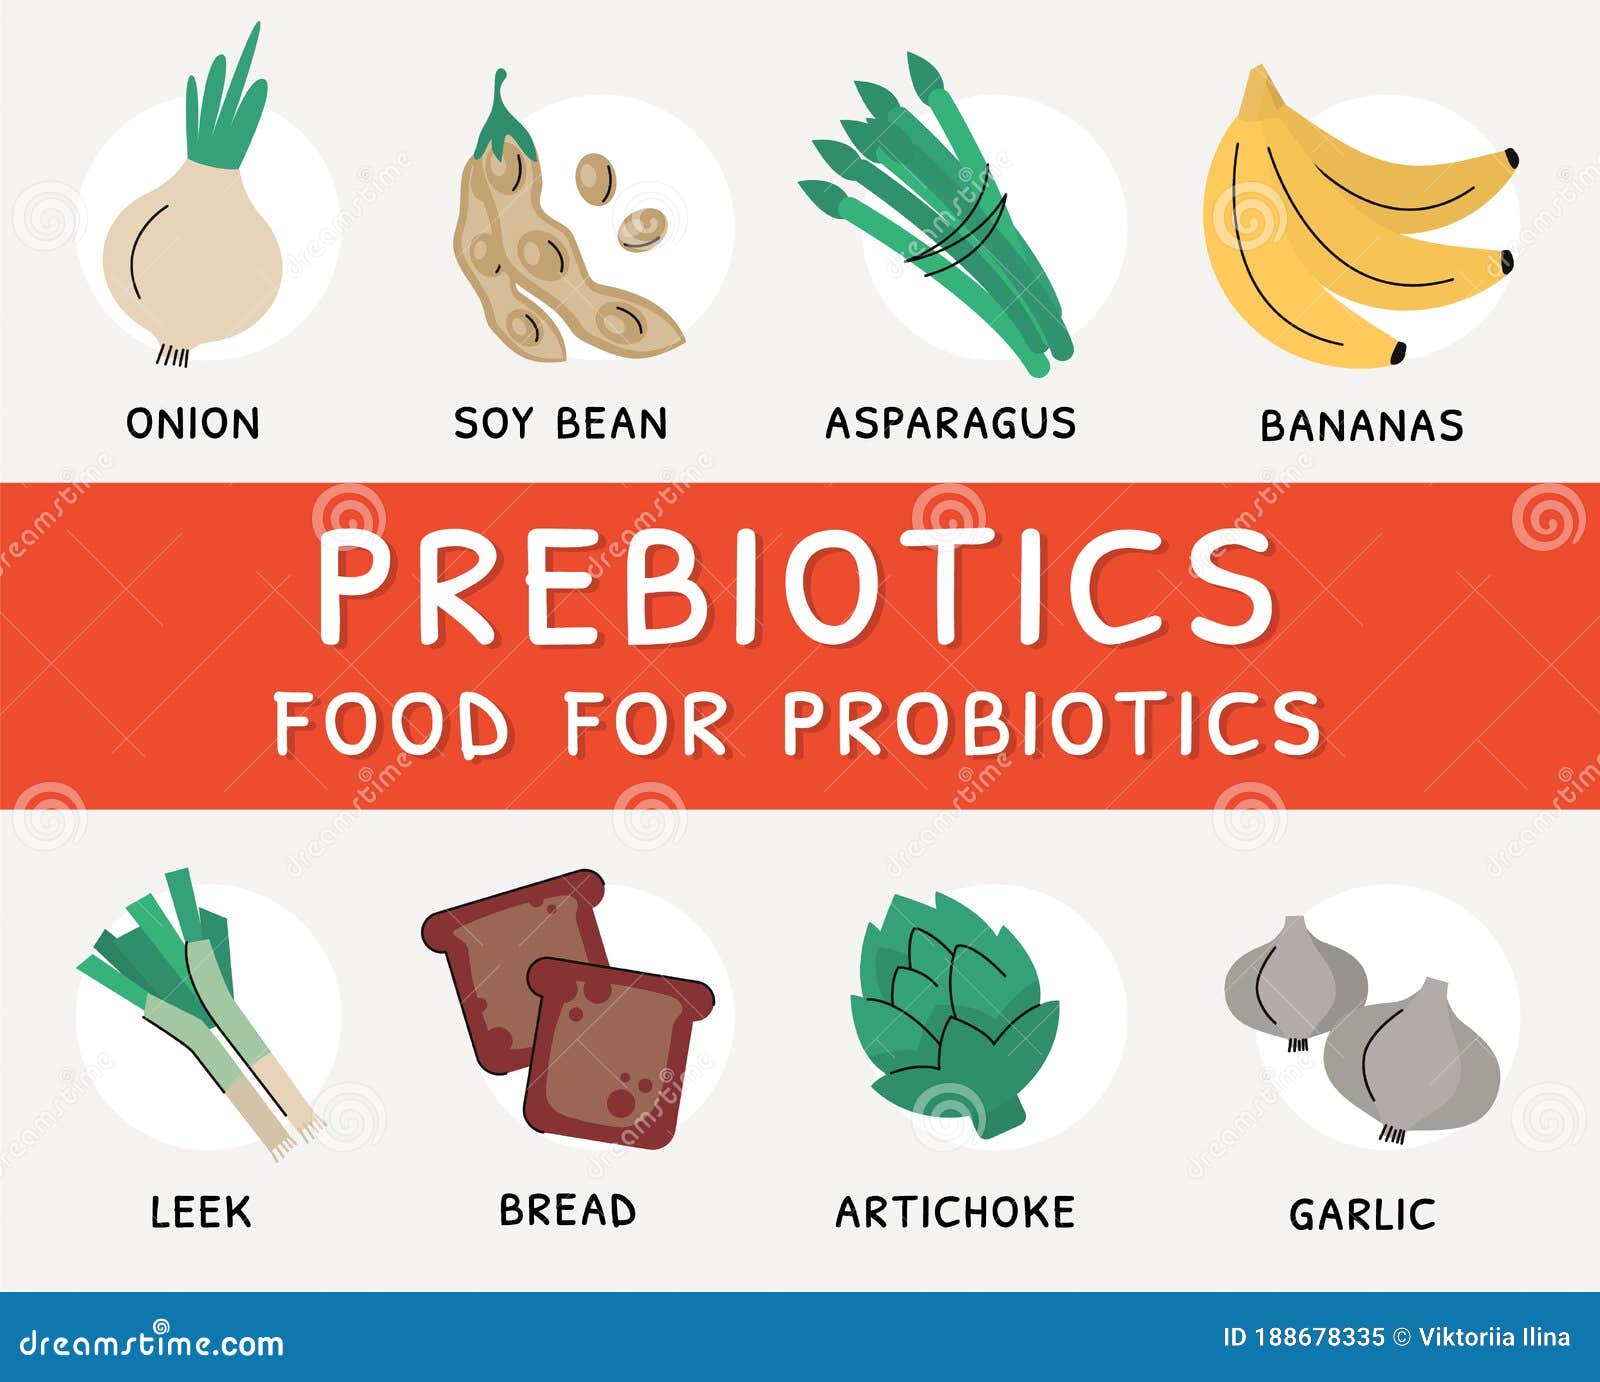 nutrient rich products and sources of prebiotics